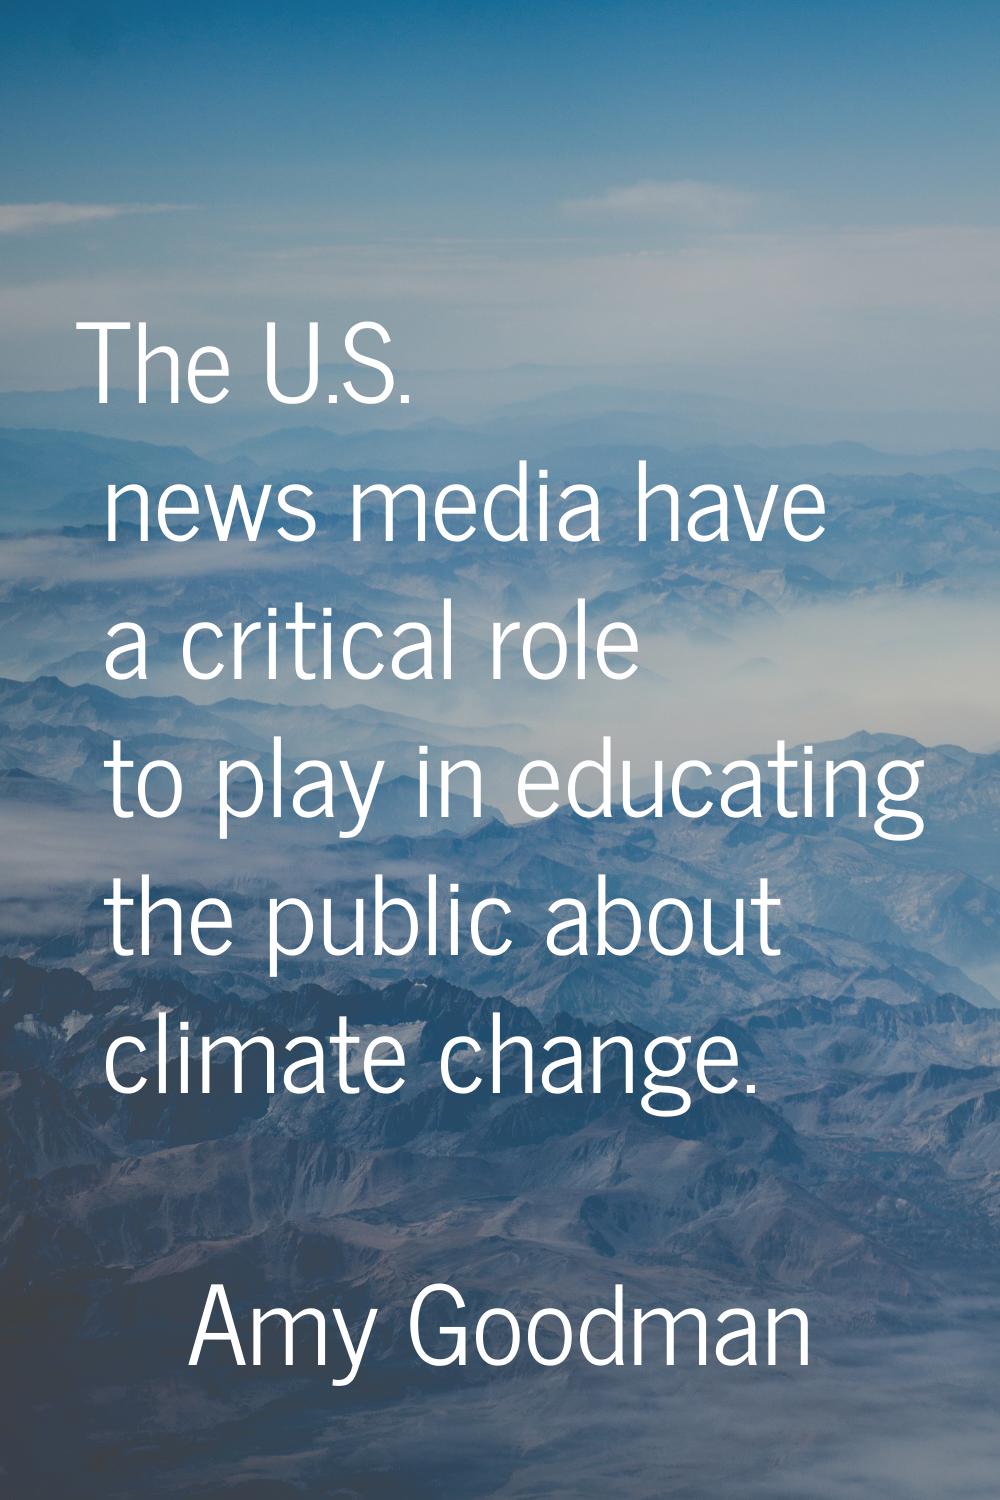 The U.S. news media have a critical role to play in educating the public about climate change.